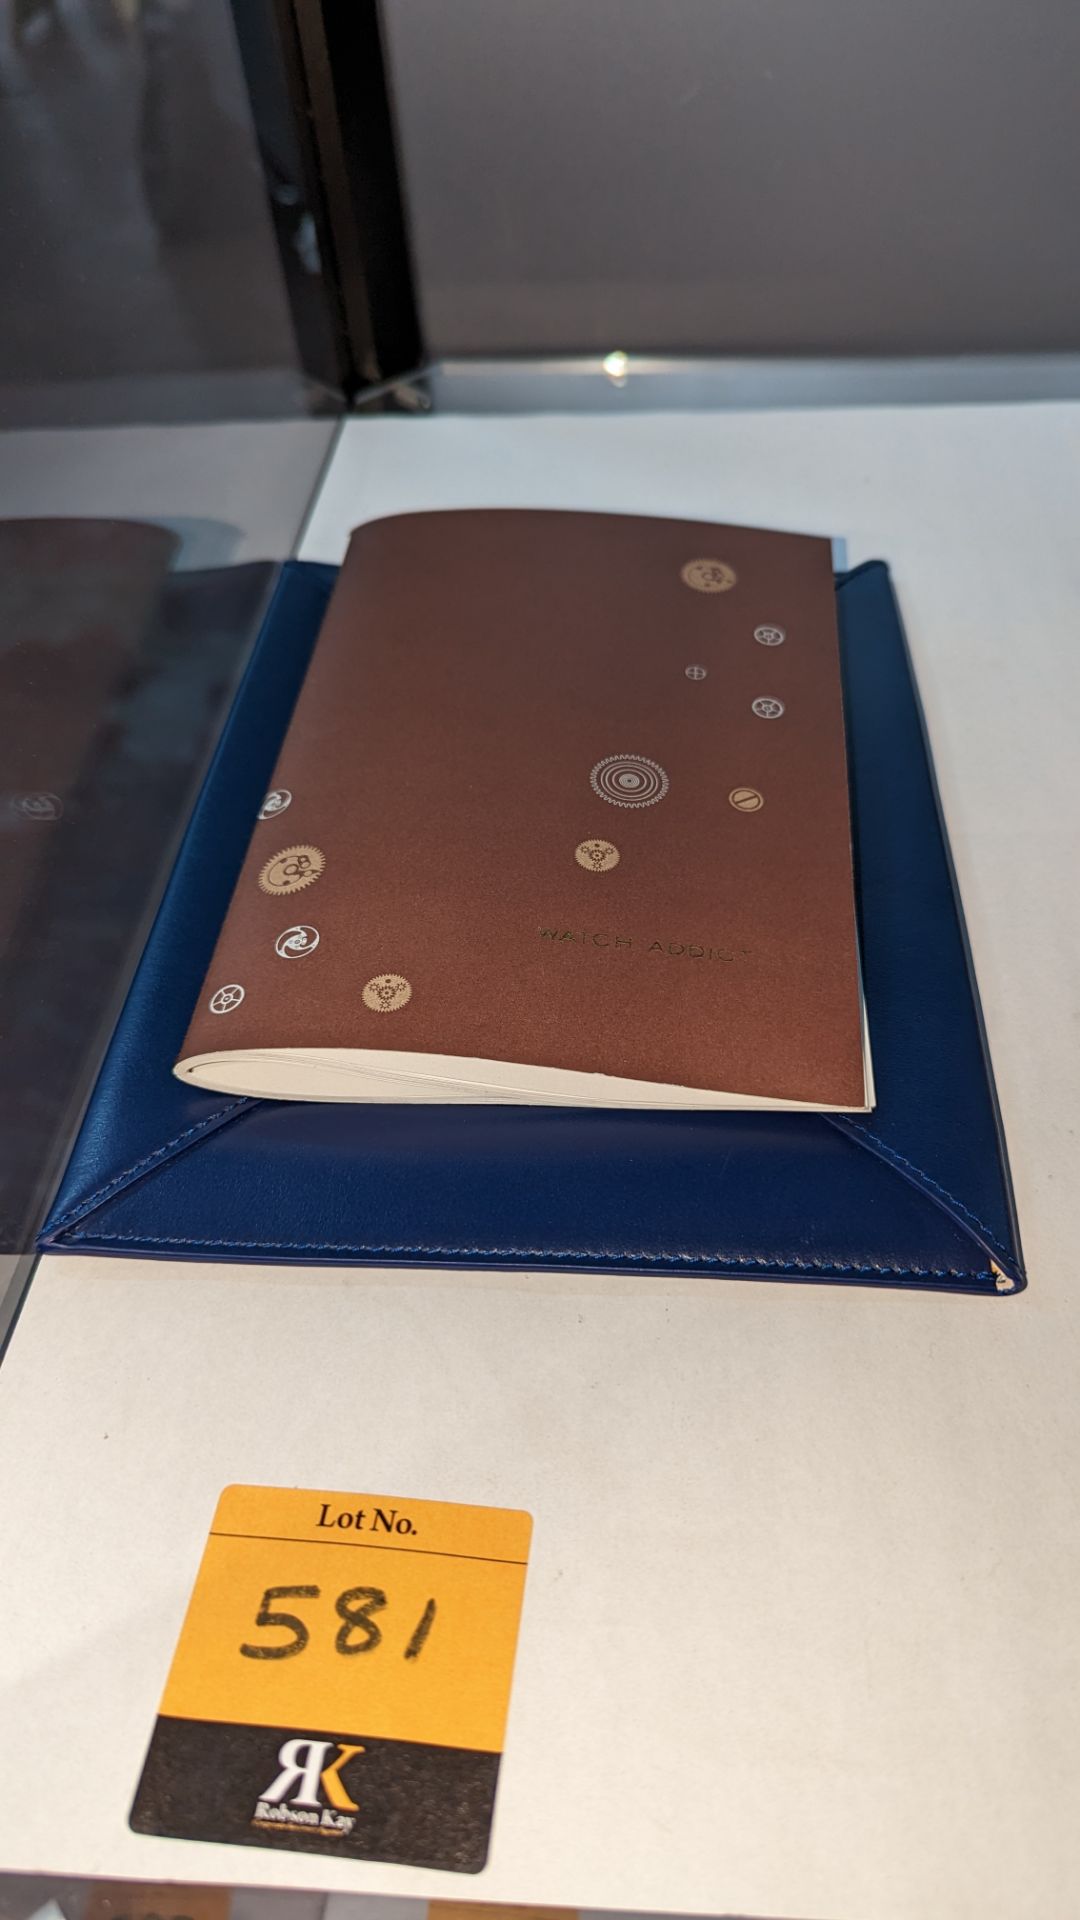 Chopard Watch Addict notebook including Chopard branded envelope in what appears to be leather